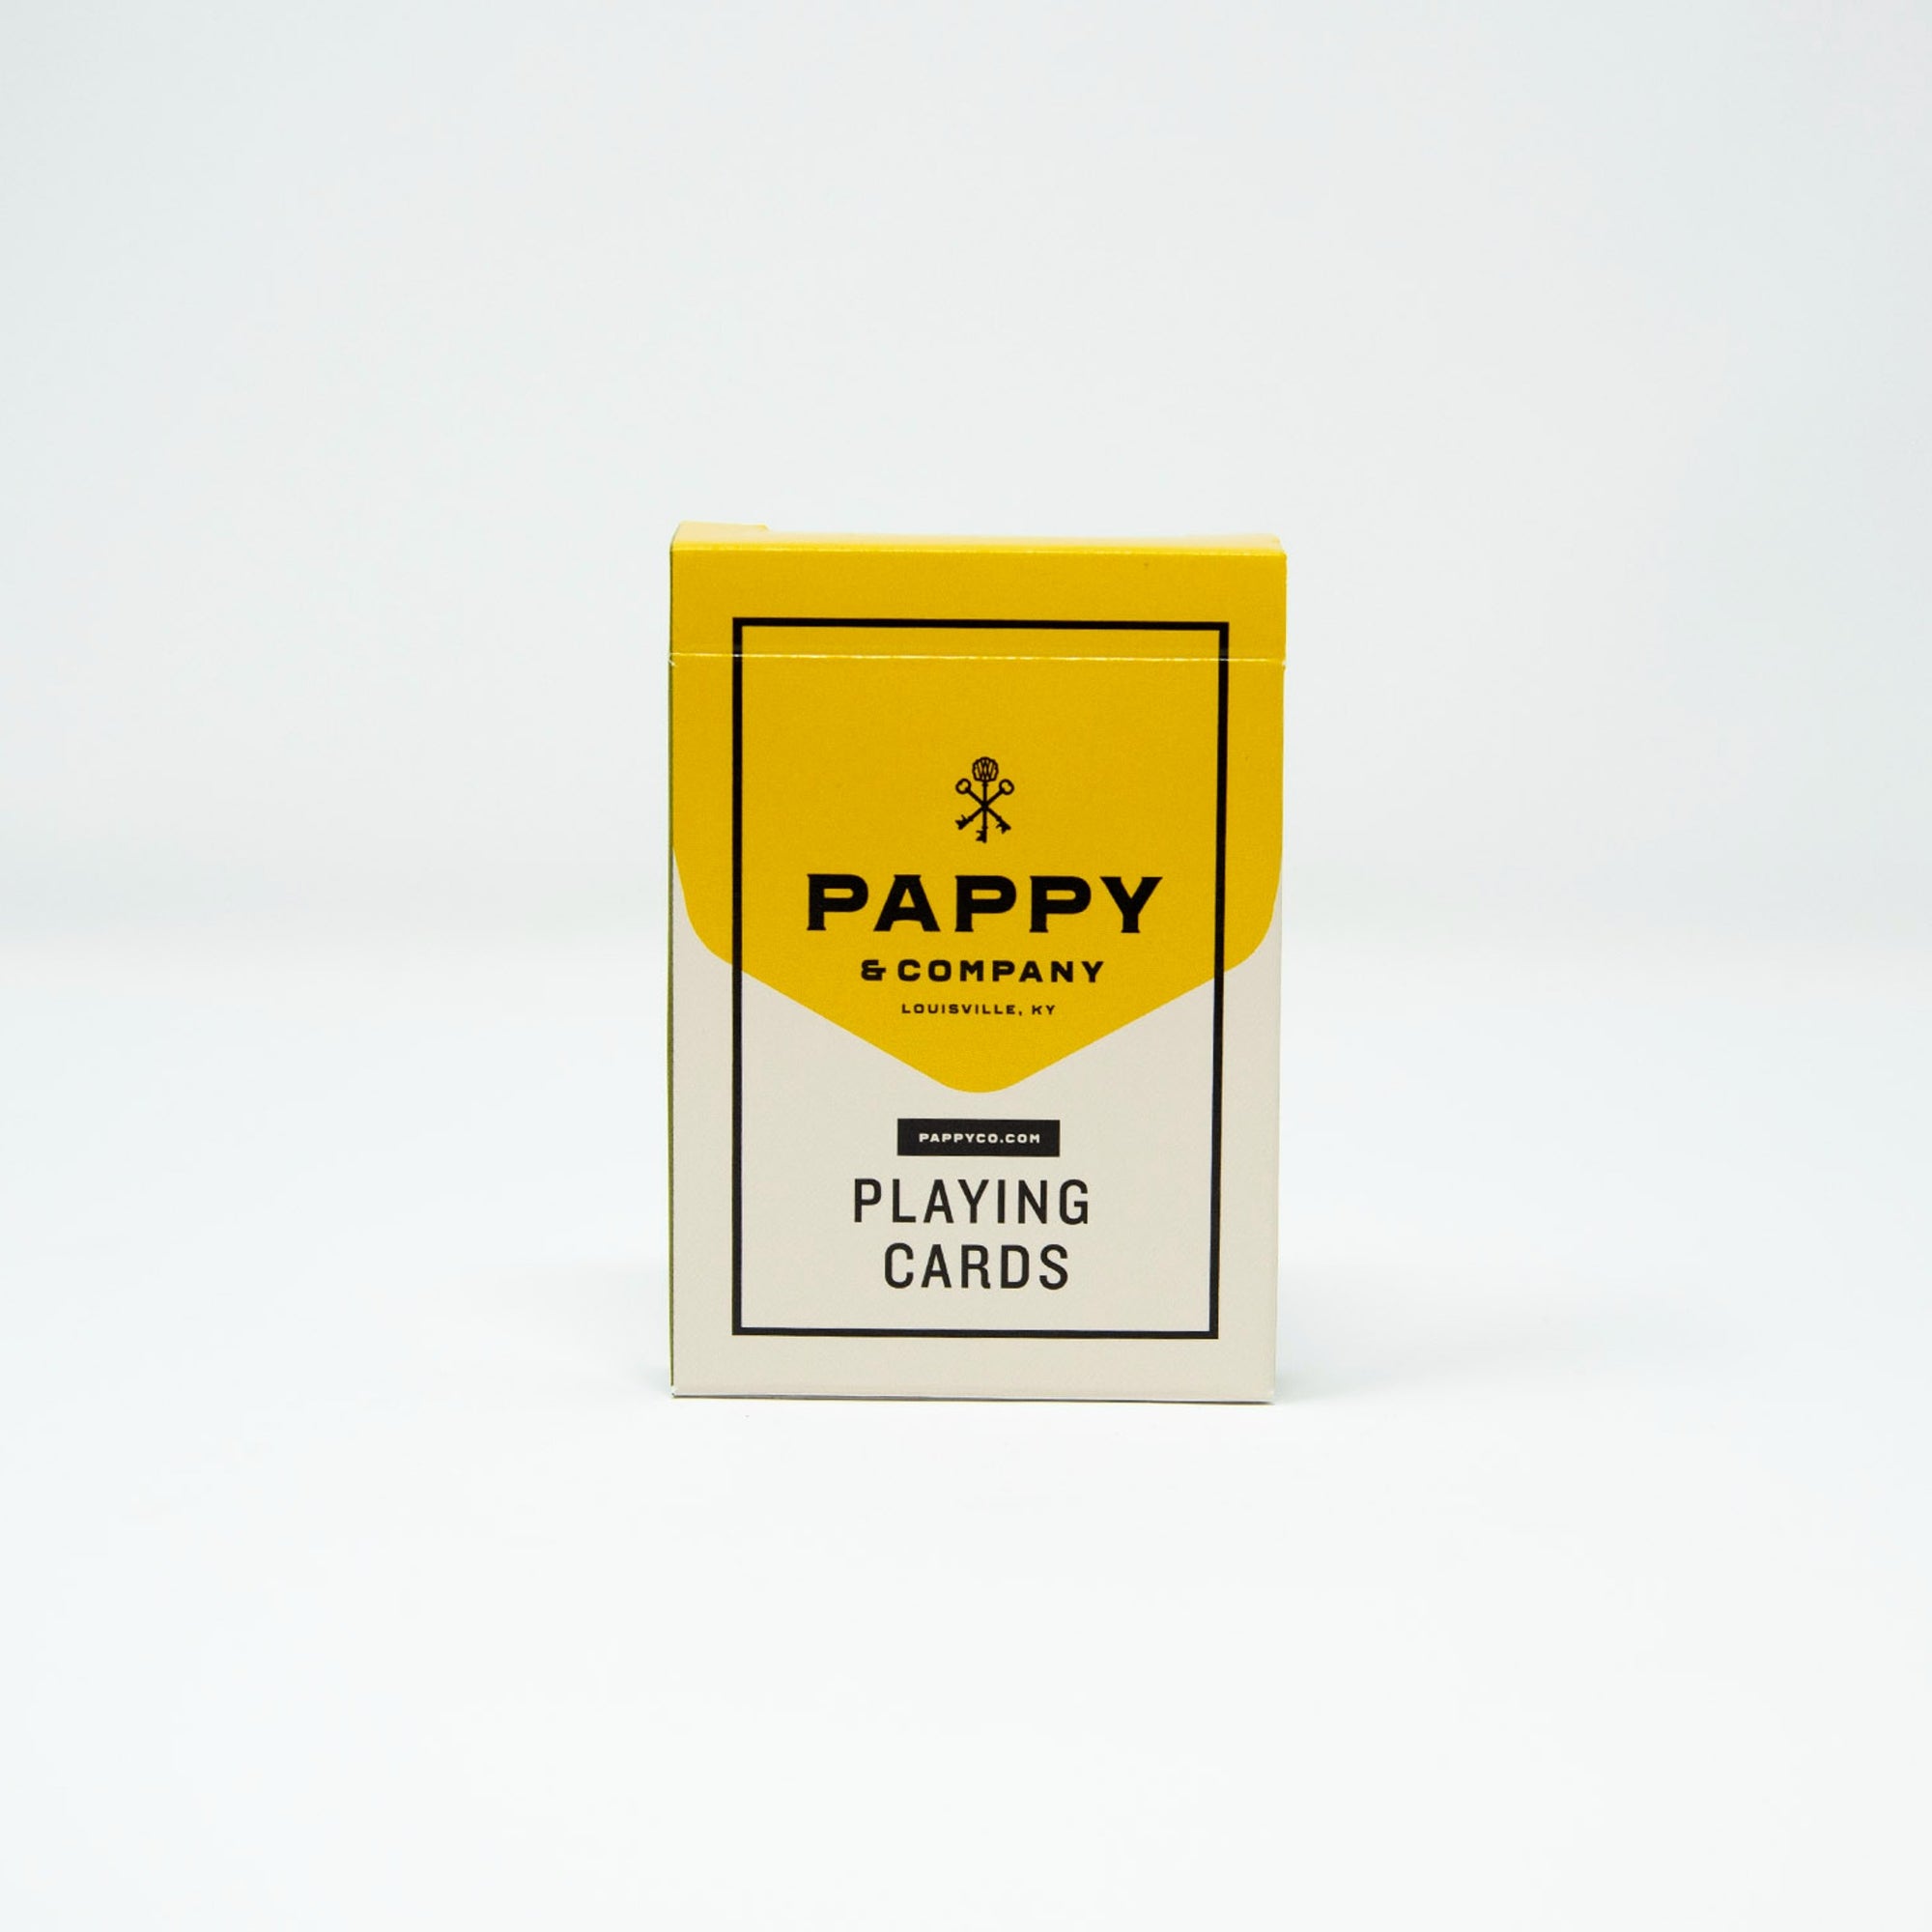 Pappy and Company Gift Cards - Pappy & Company